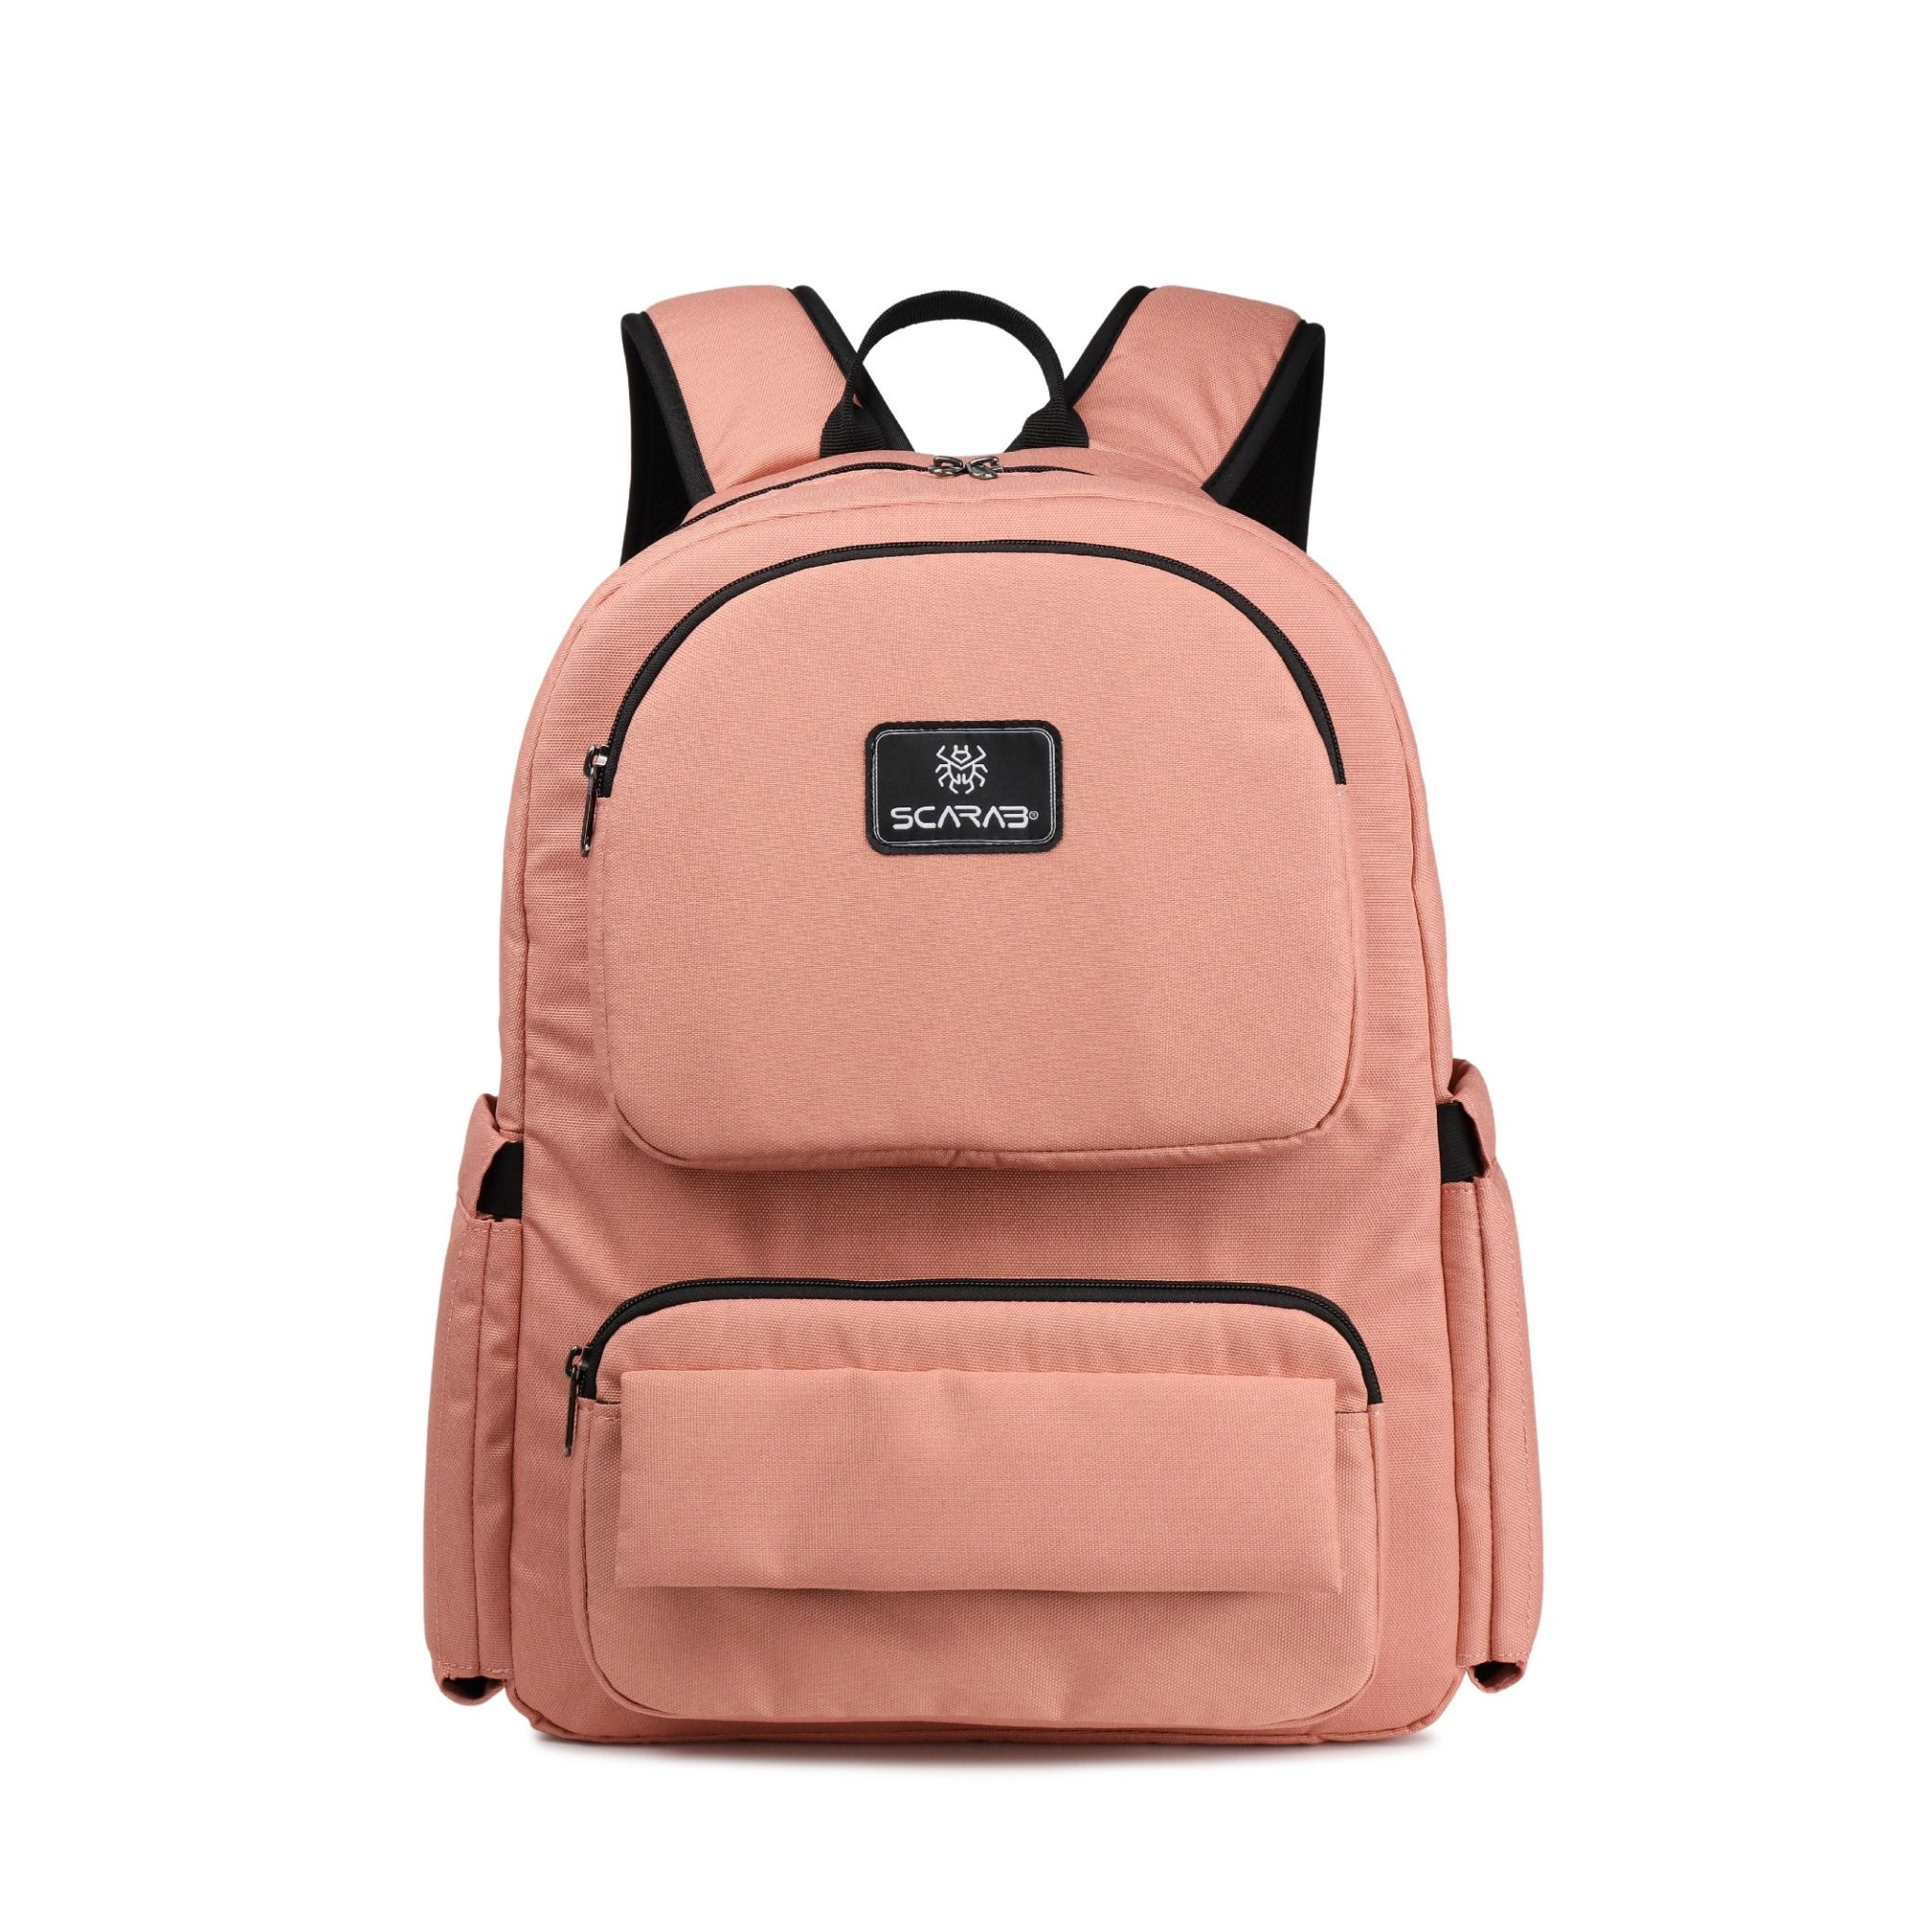  FUSSY VERSION 2 BACKPACK - CORAL 